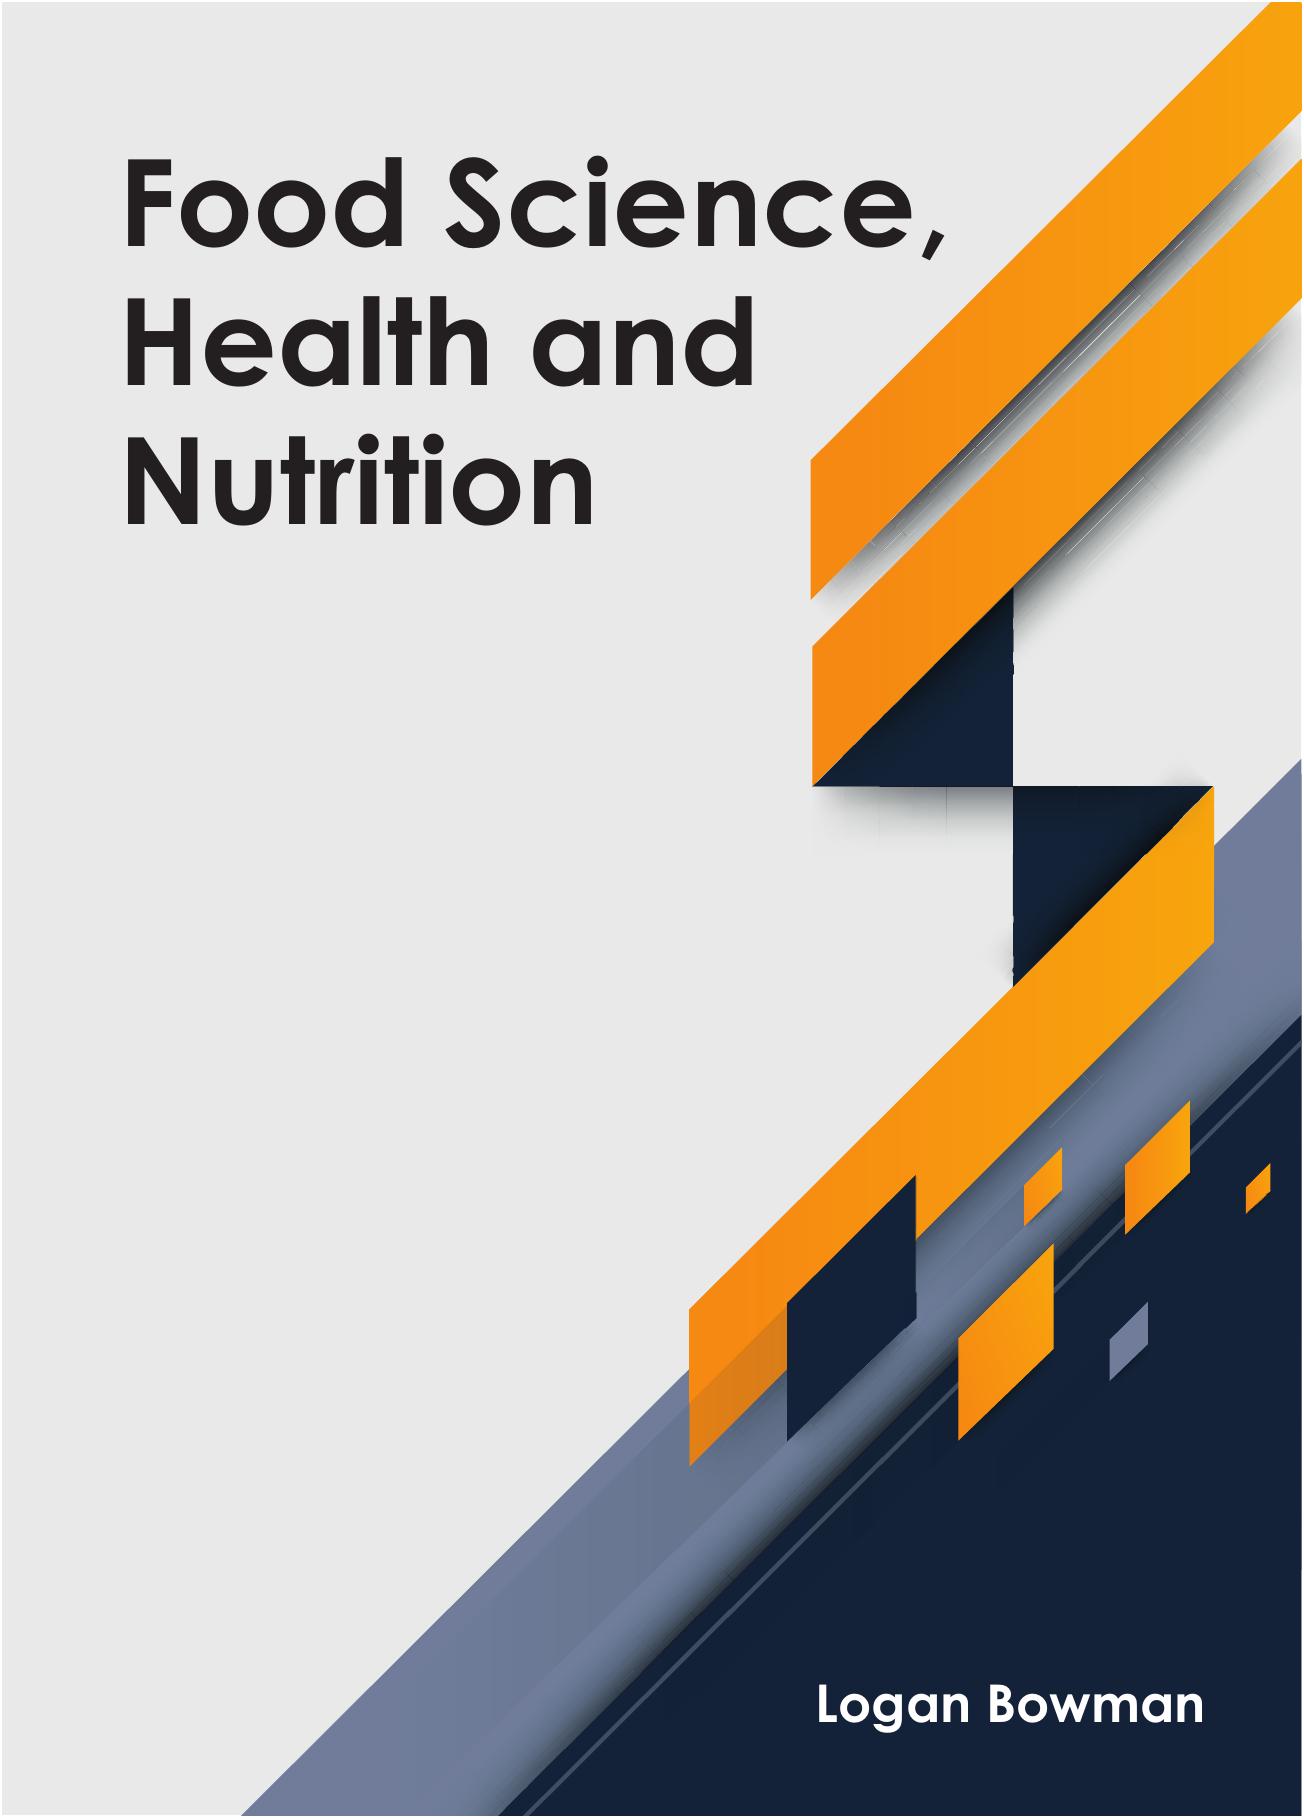 Food Science, Health and Nutrition 2017